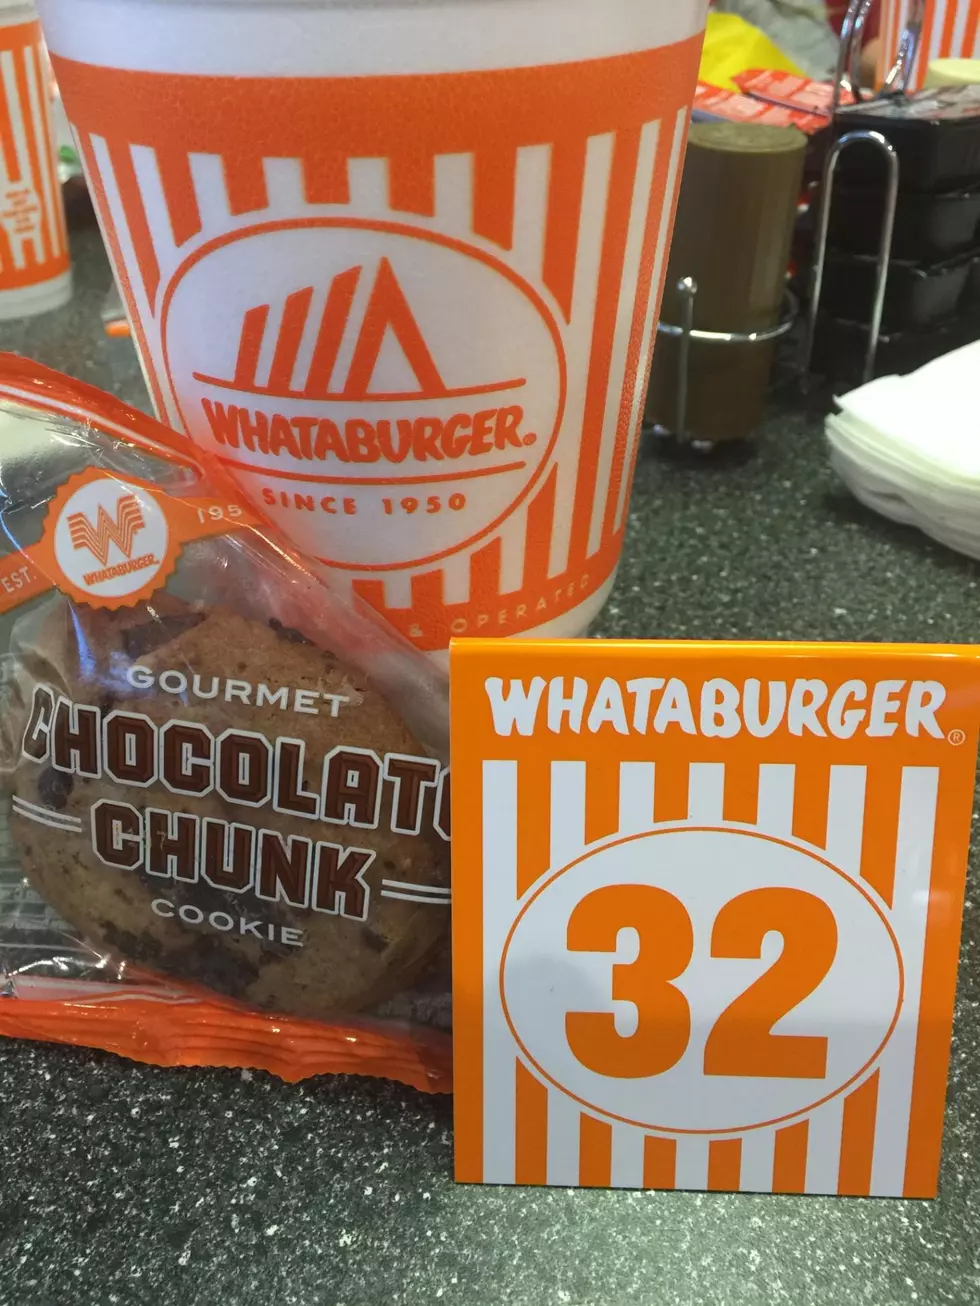 One Amarillo Person is Going to Win Whataburger For A Year